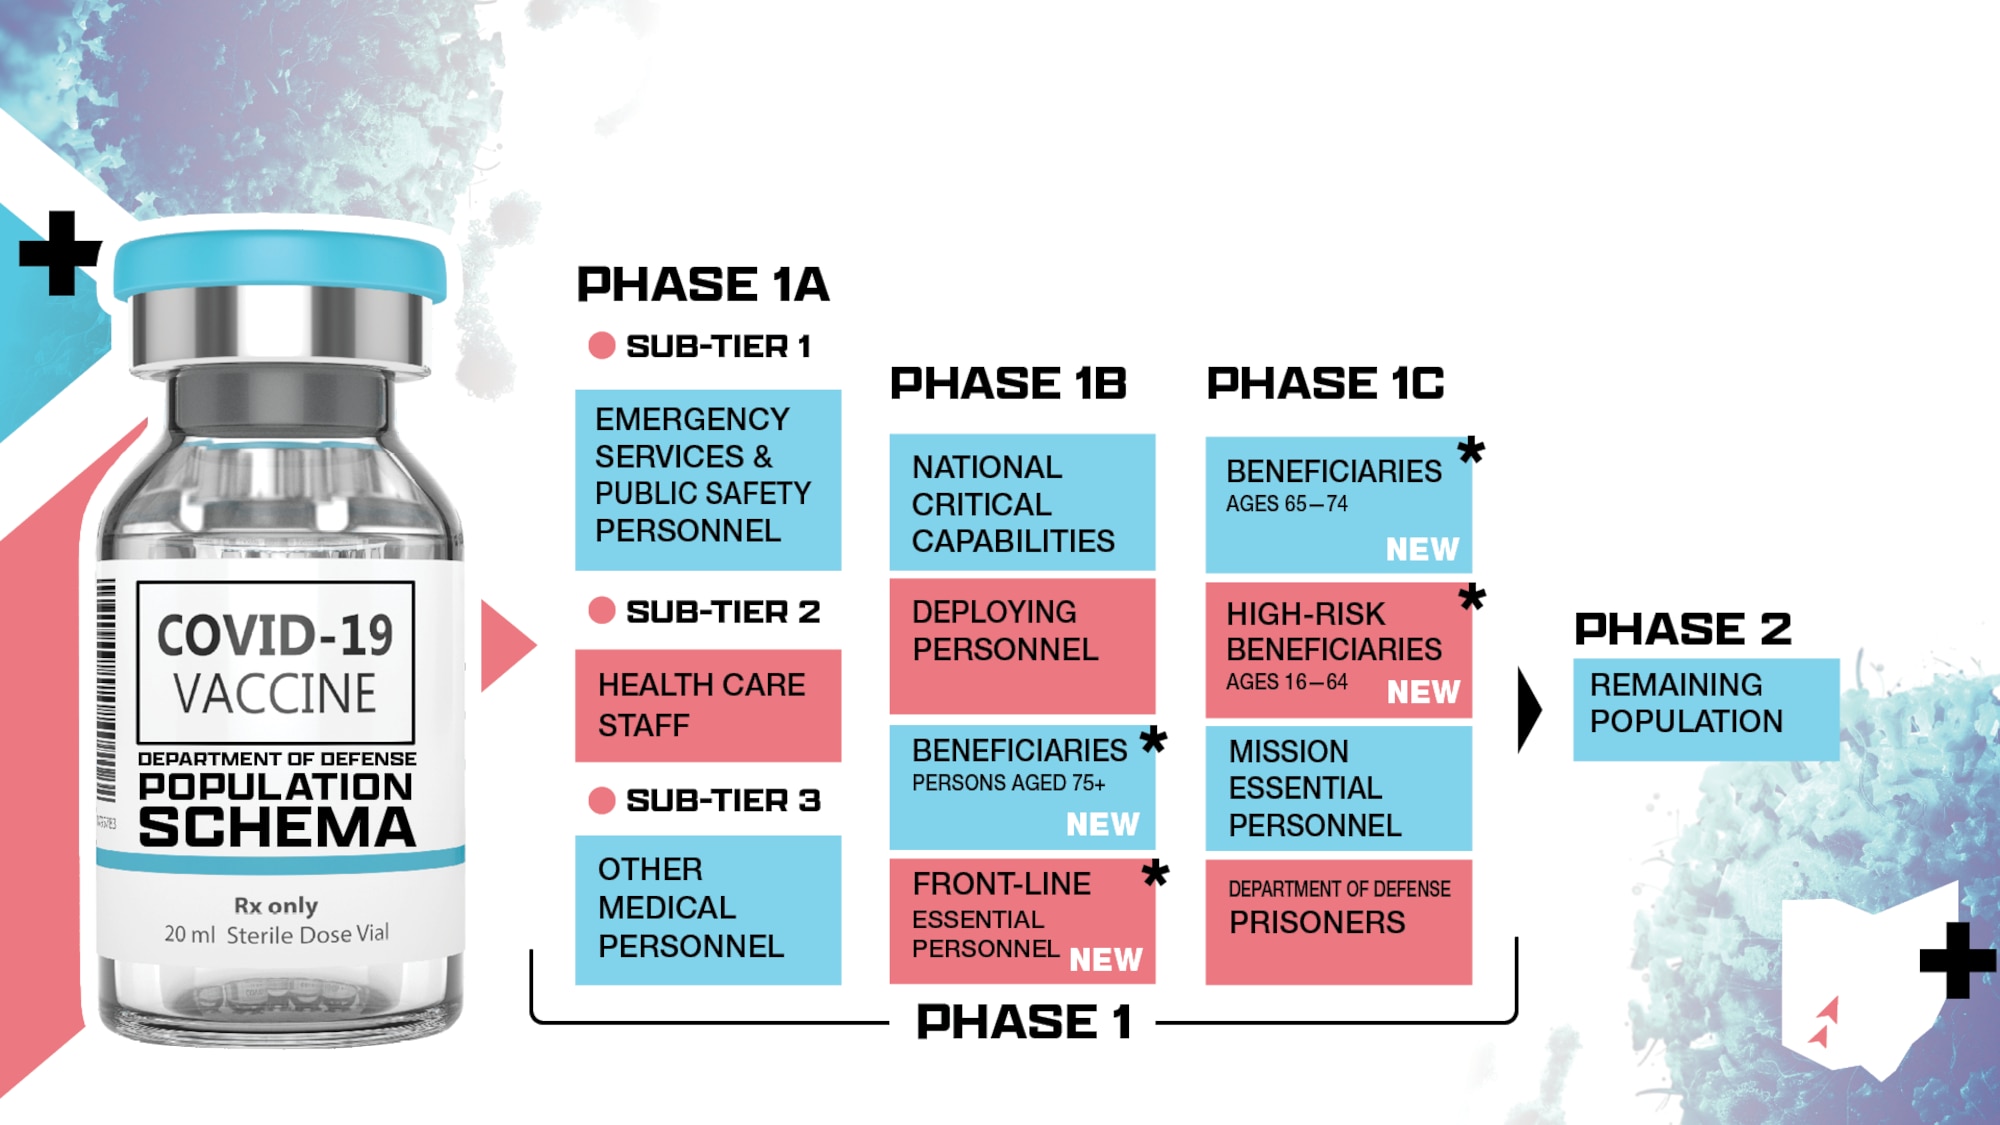 Phase 1 and Phase 2 of the DoD population schema for the COVID-19 vaccine